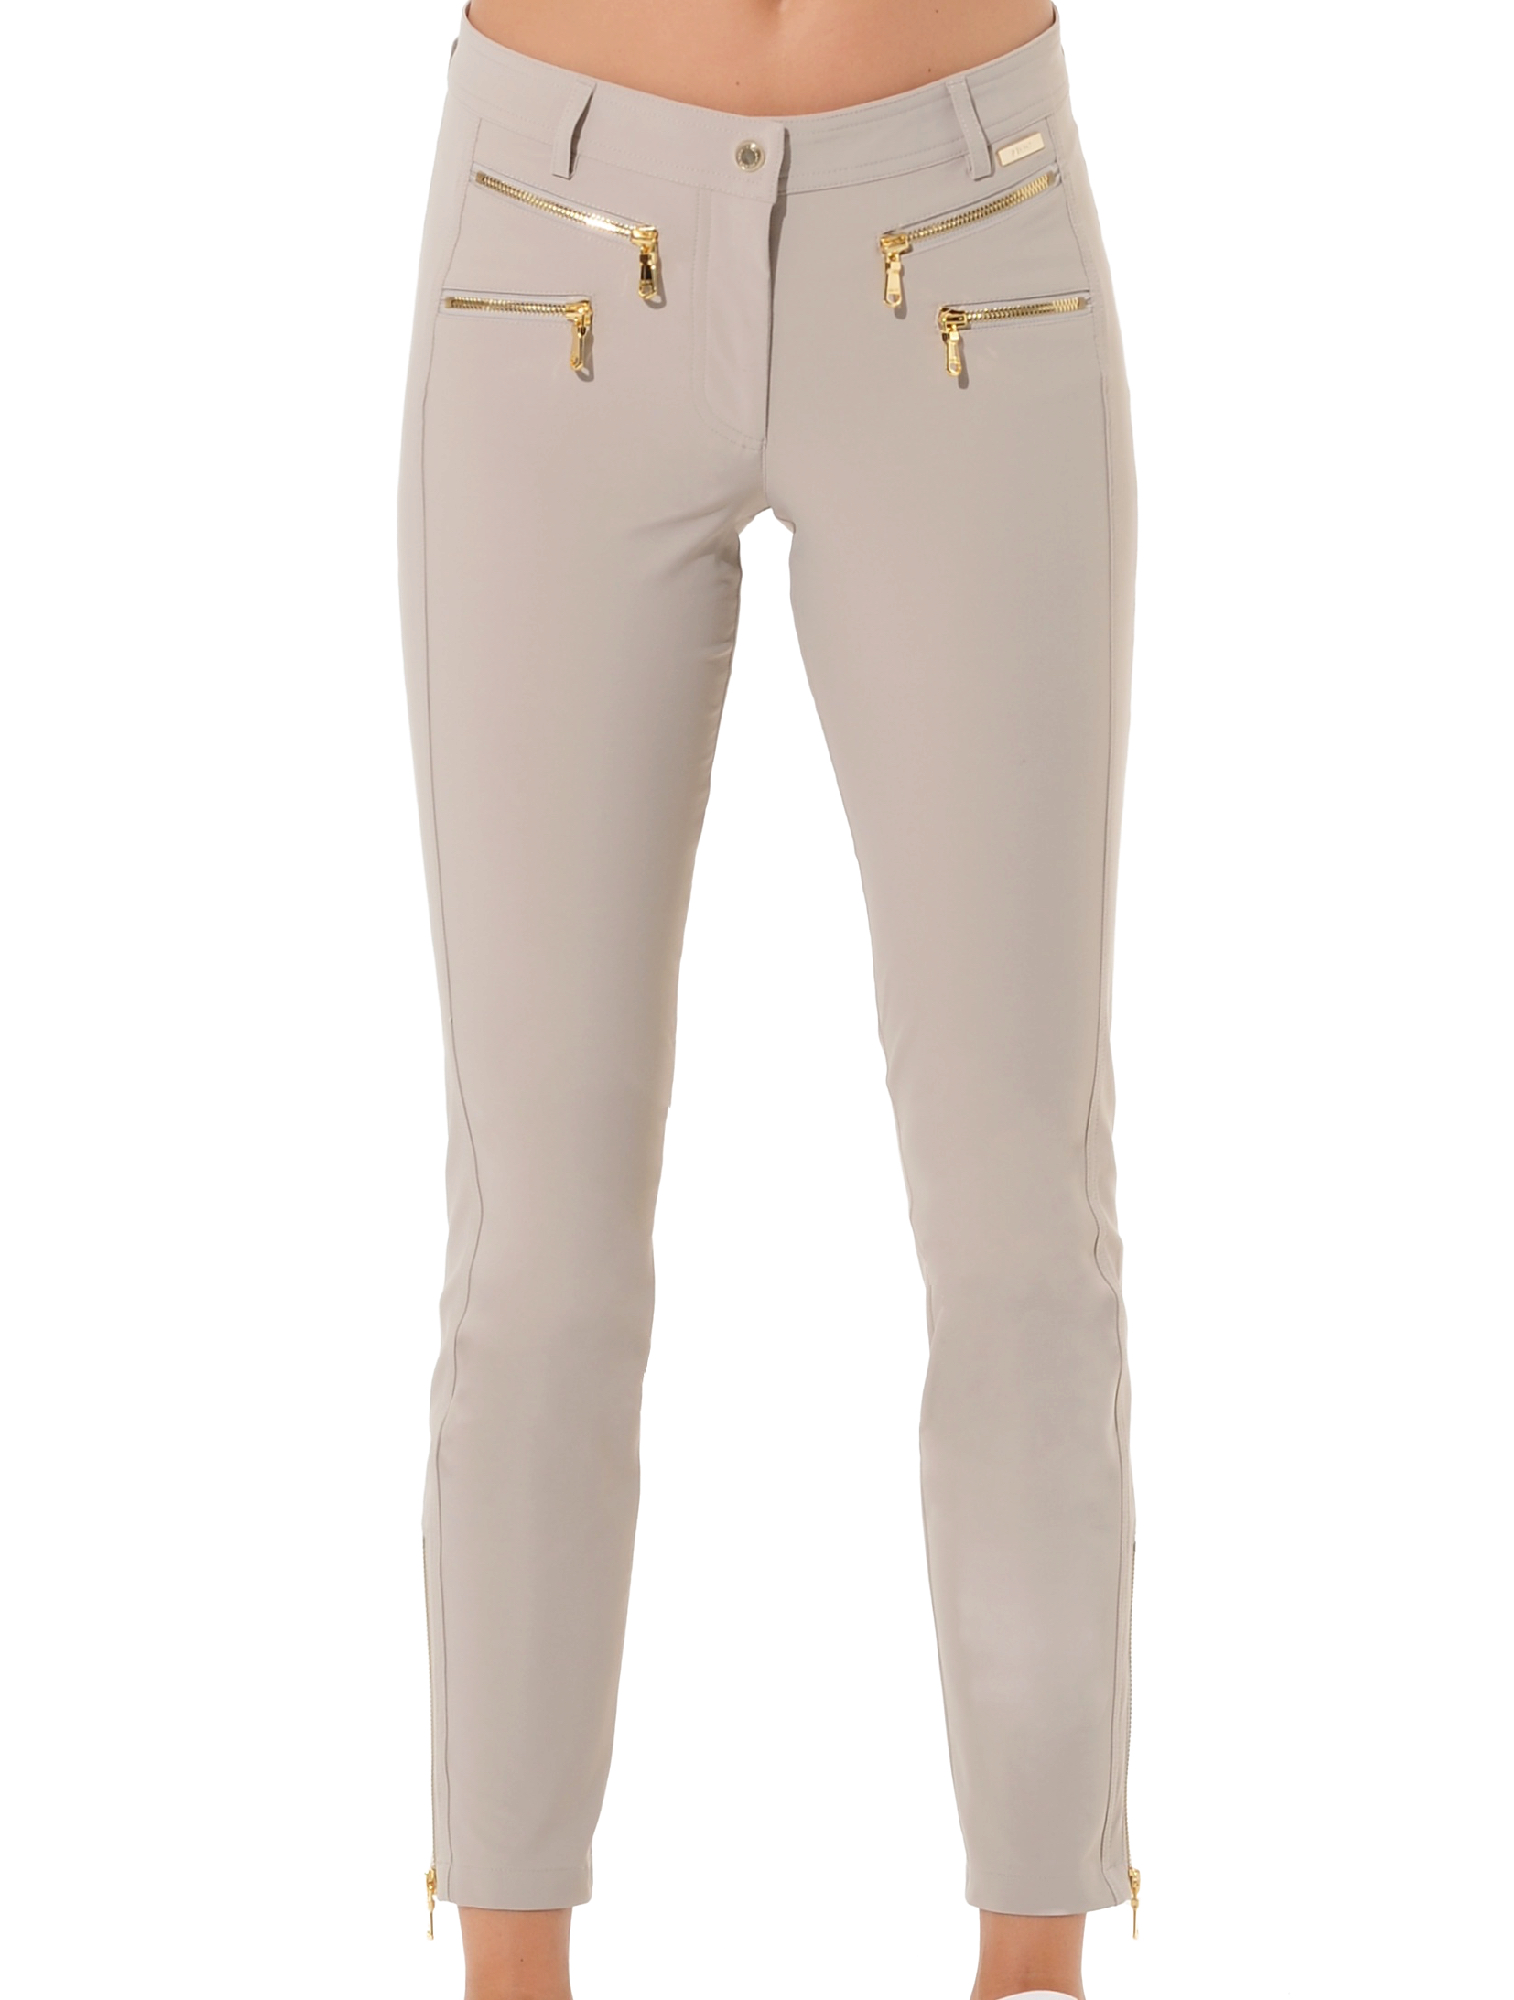 4way stretch shiny gold double zip ankle pants light taupe 